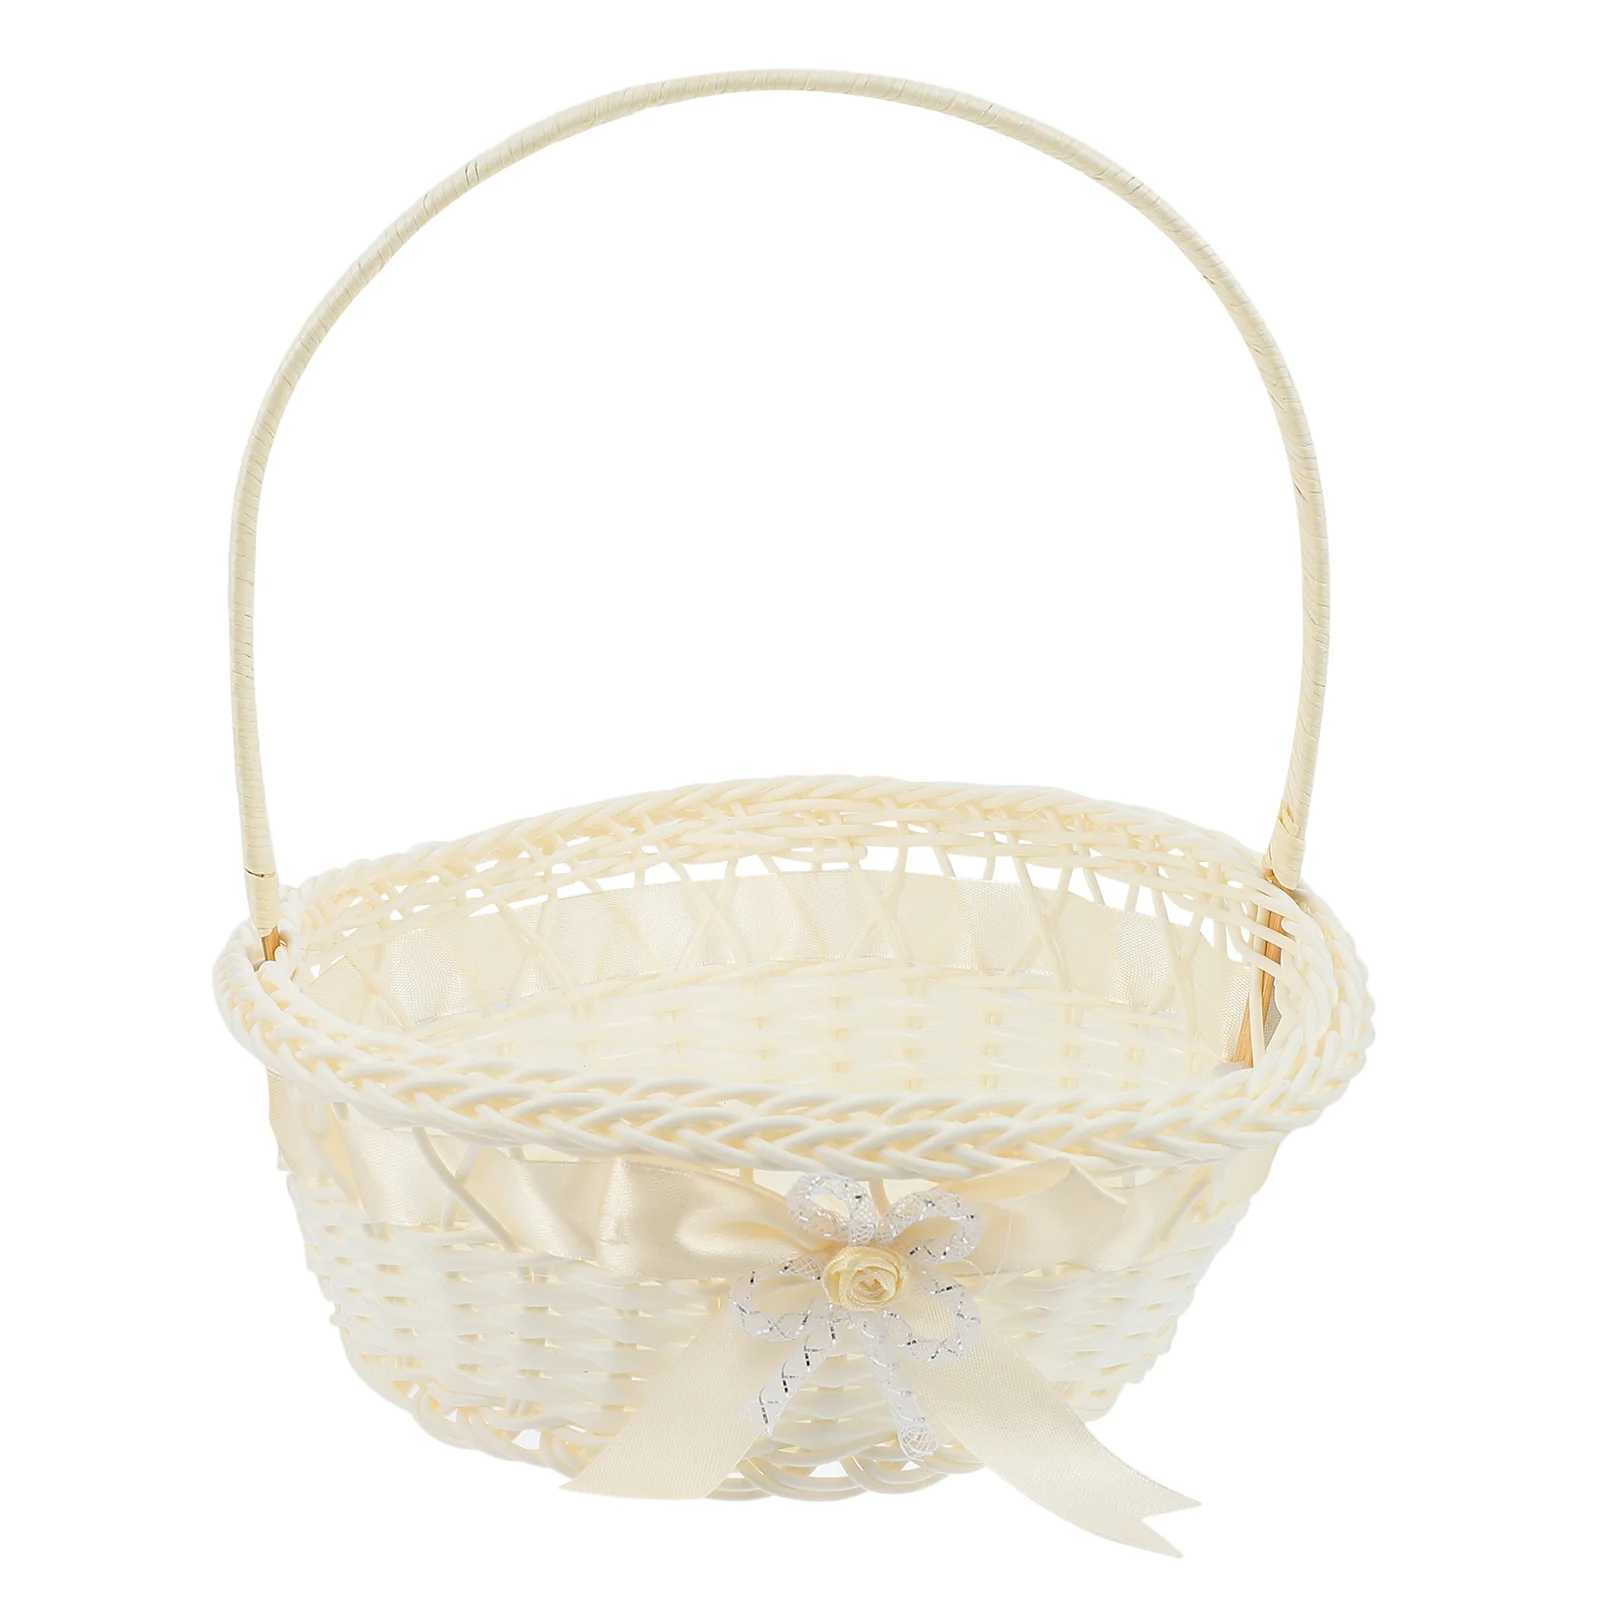 

Basket Flower Wedding Girl Wicker Storage Baskets Picnic Woven Candy Rattan Gift Petal Fruit Party Handle Rustic Table